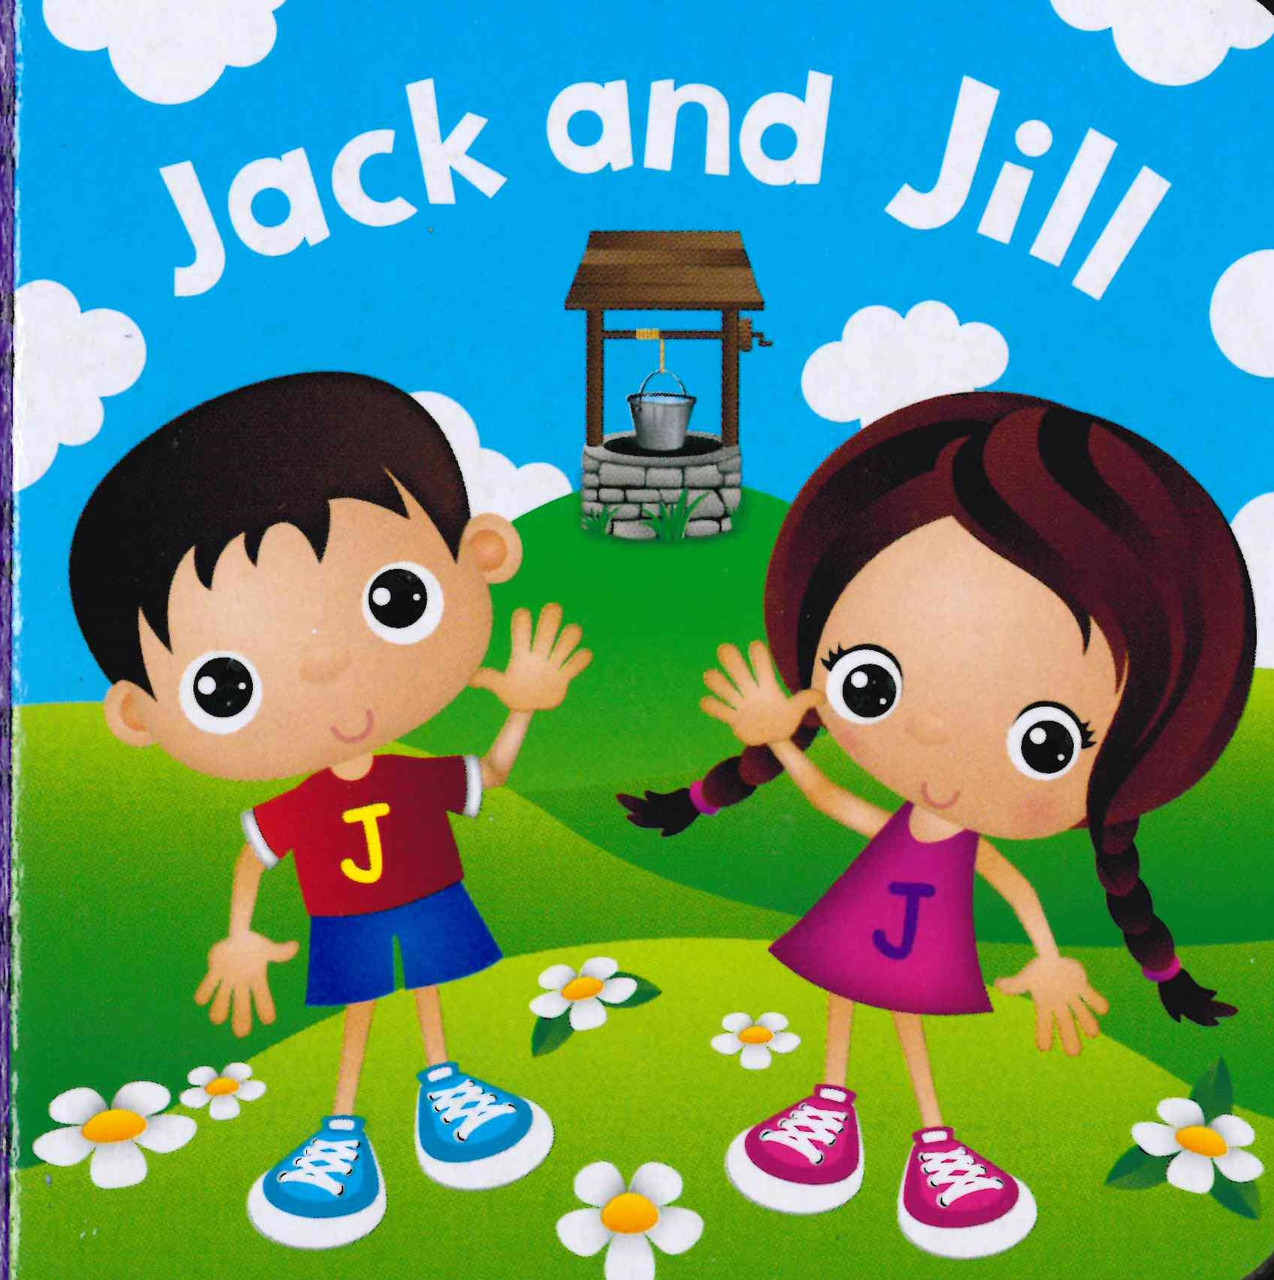 Jack and Jill (Chunky Board Book) SIZE is 3.0 x 3.0 x .75 inches